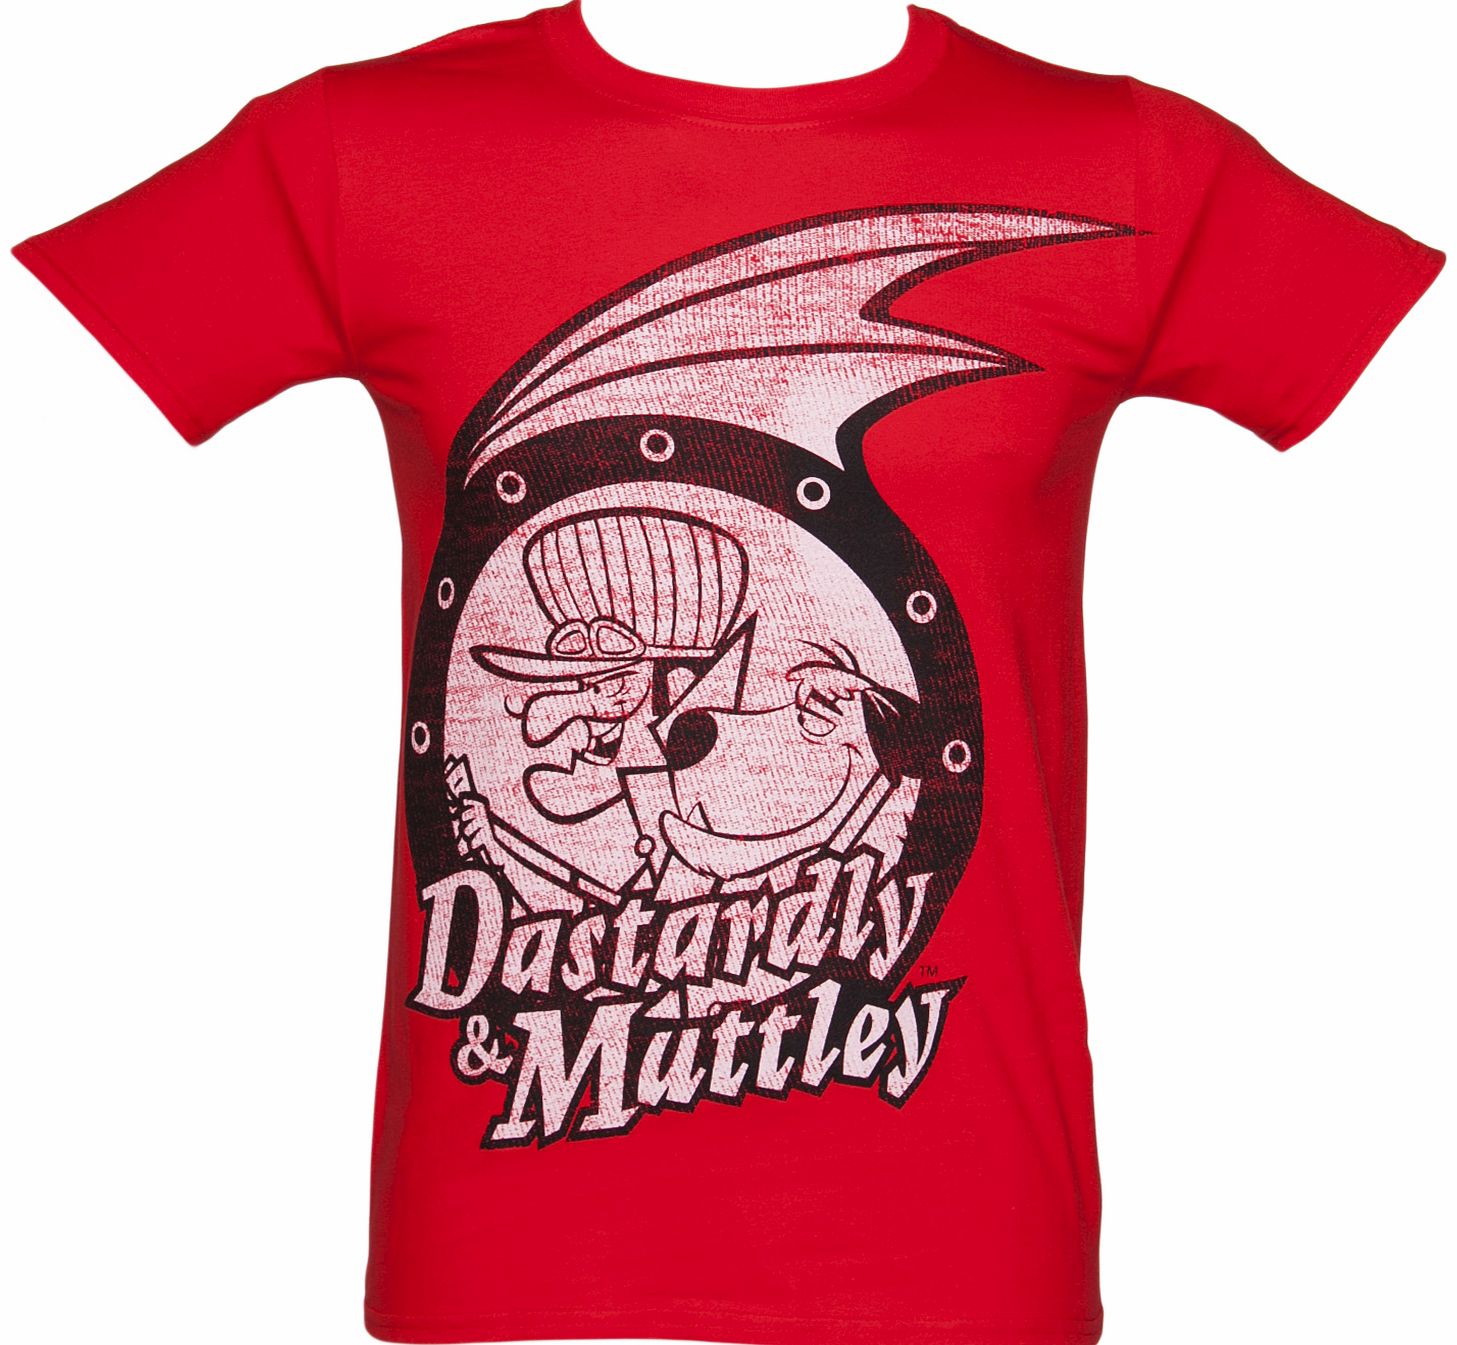 Mens Red Dastardly And Muttley Hanna-Barbera